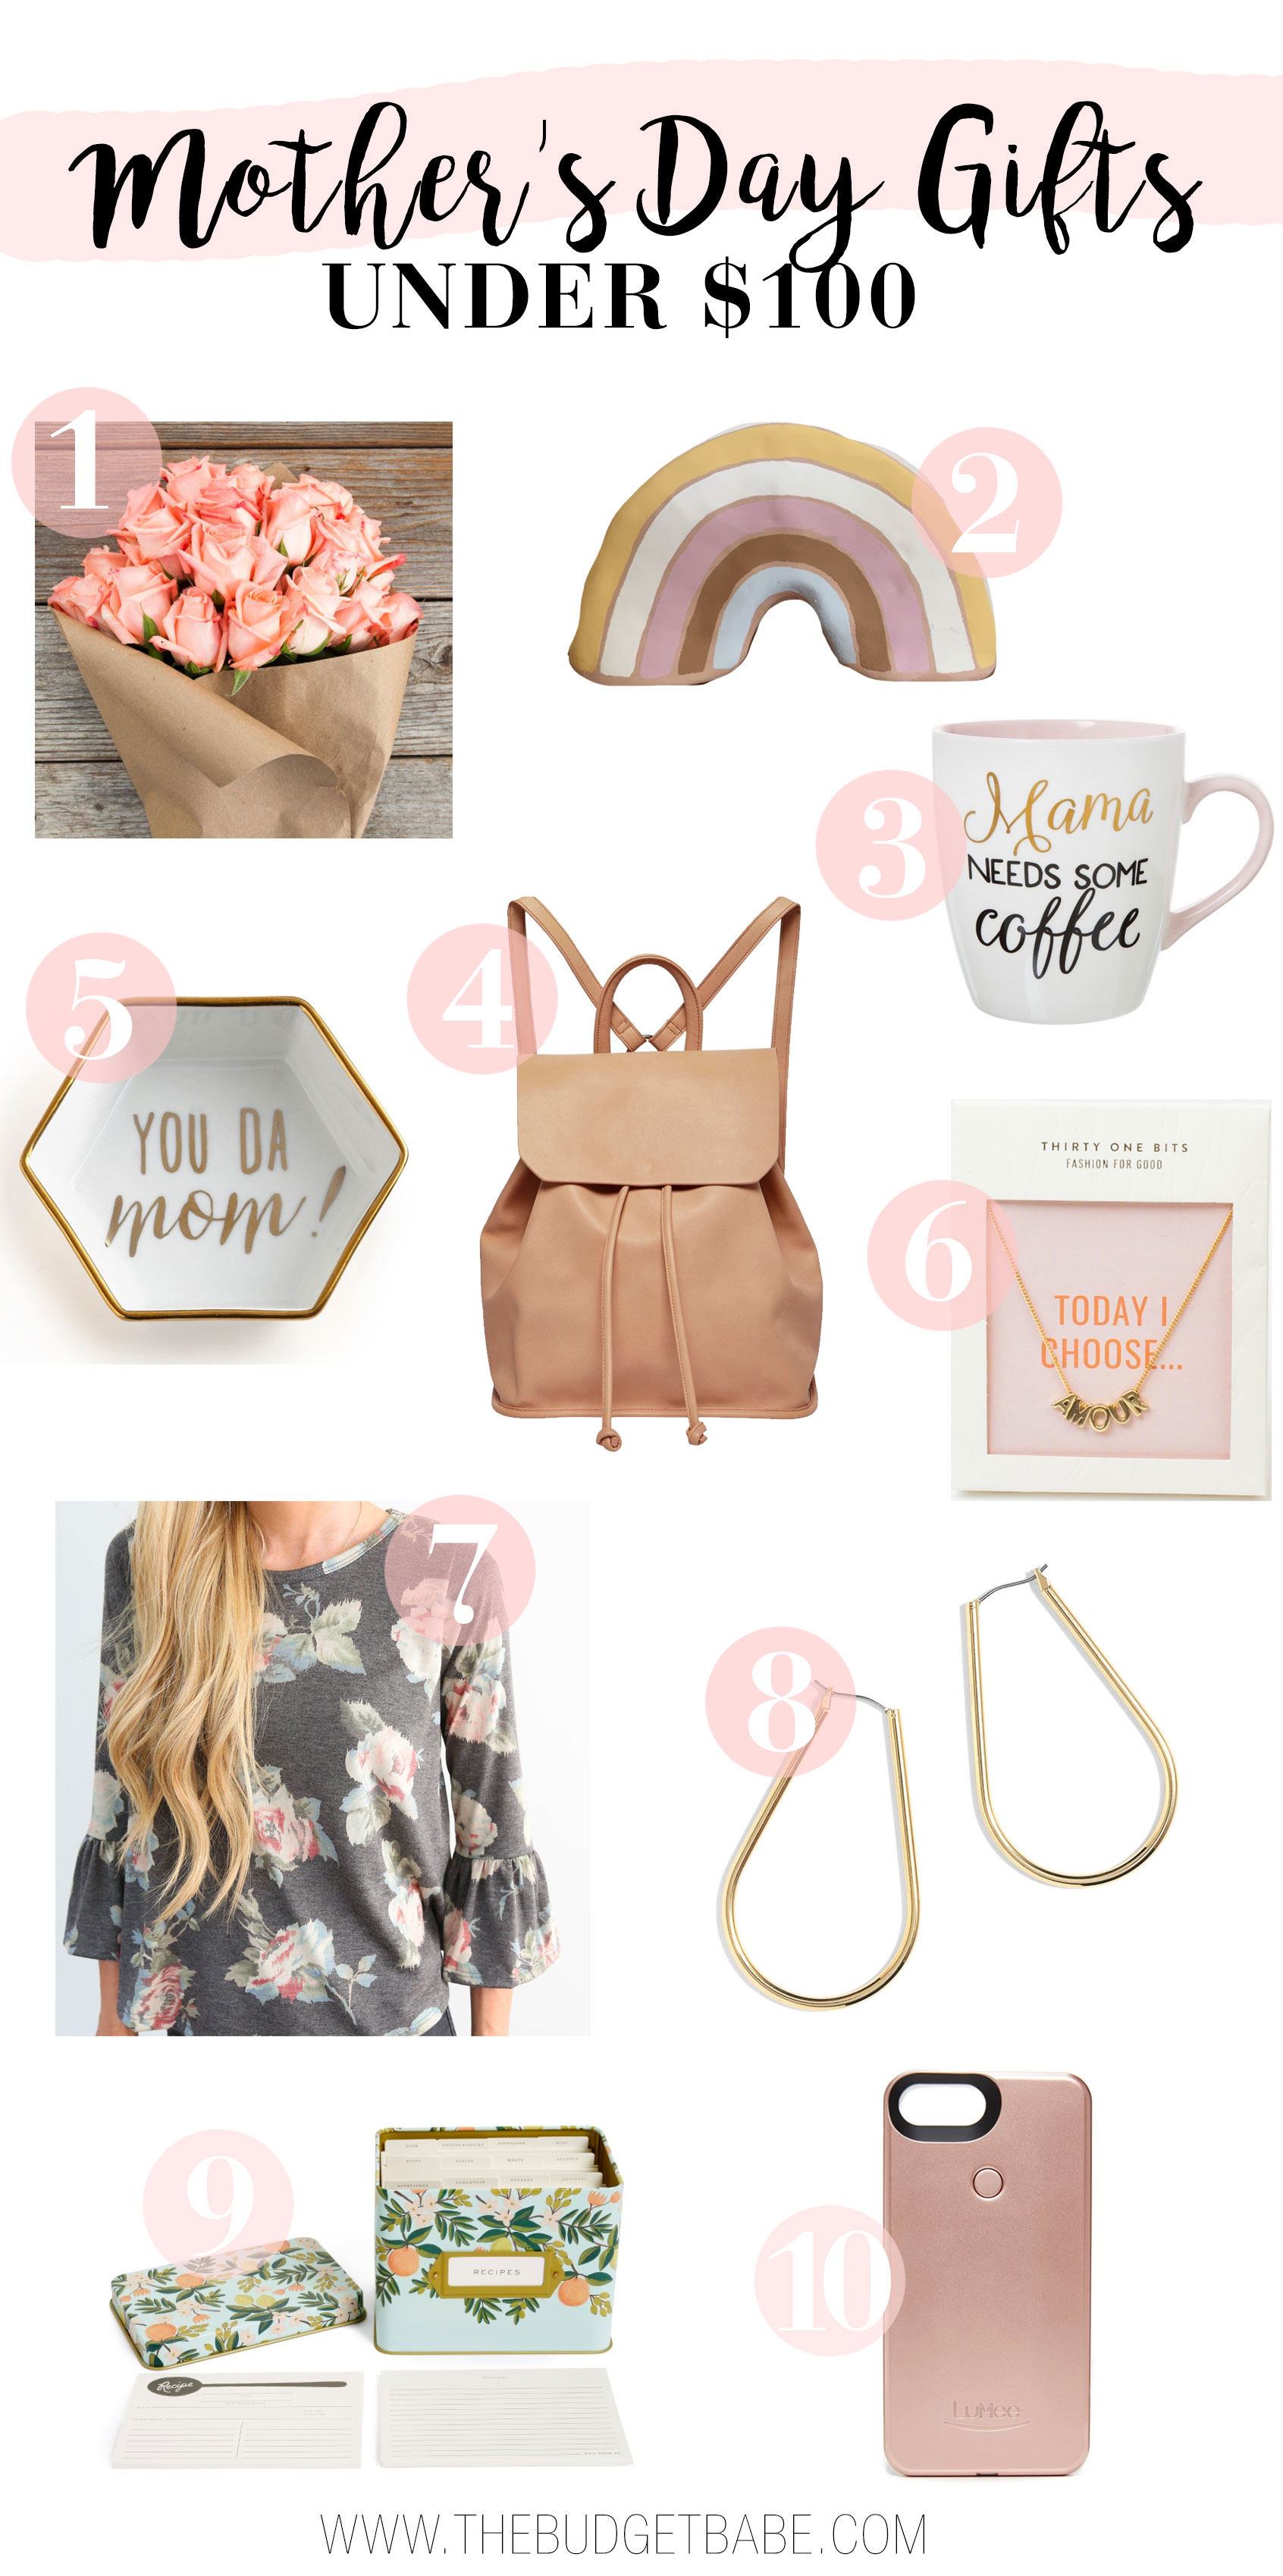 Looking for the perfect Mother's Day gift? Fashion blogger Dianna Baros puts together the perfect guide with finds from just $5.99.